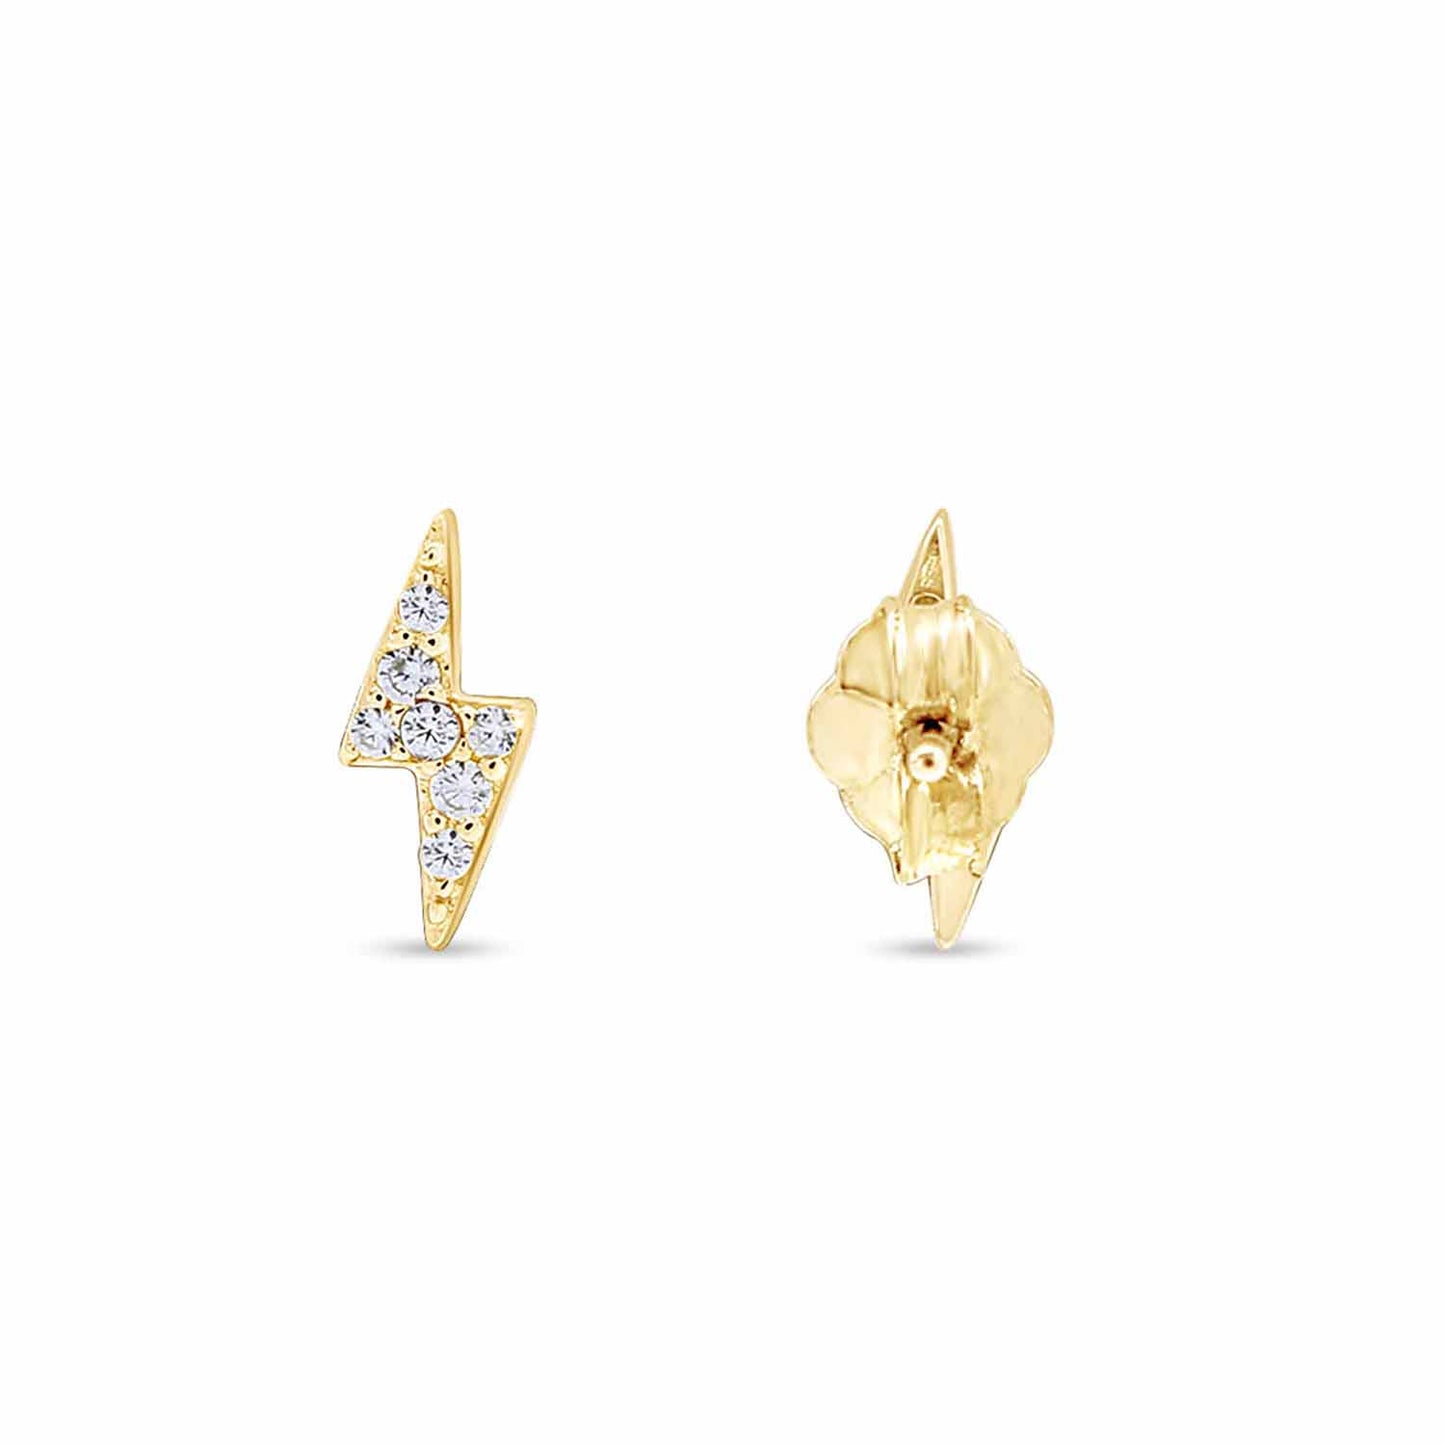 Round Cut White Cubic Zirconia Stud Earrings Dainty Feather, Starburst, Lightning Bolt, Nail, Curved Bar, Disc, Pineapple For Women In 925 Sterling Silver